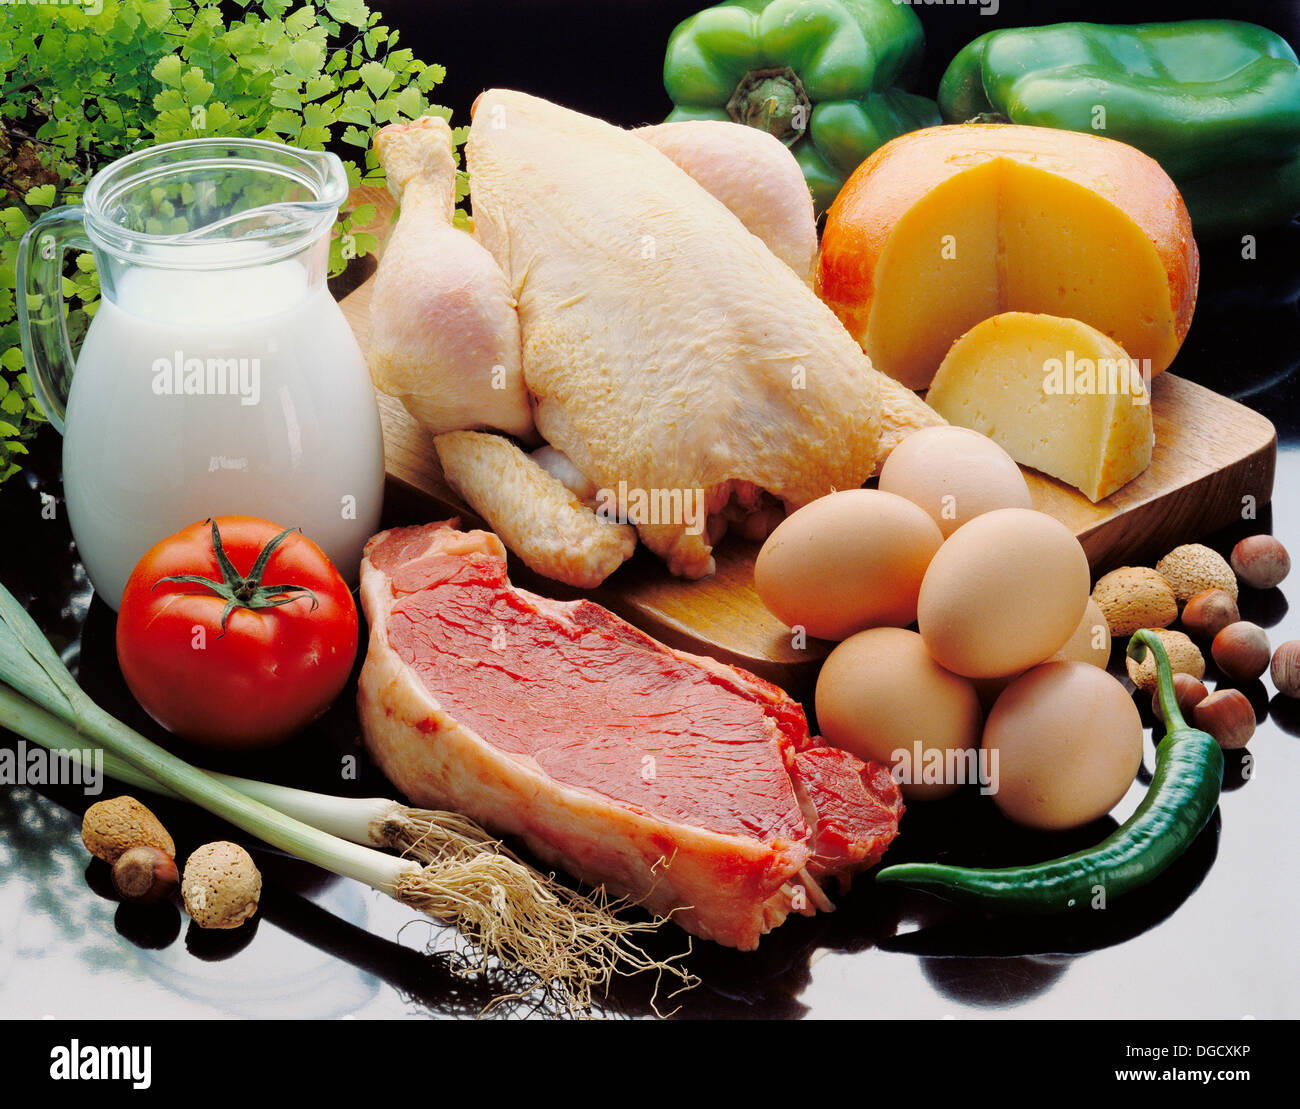 Food containing proteins Stock Photo